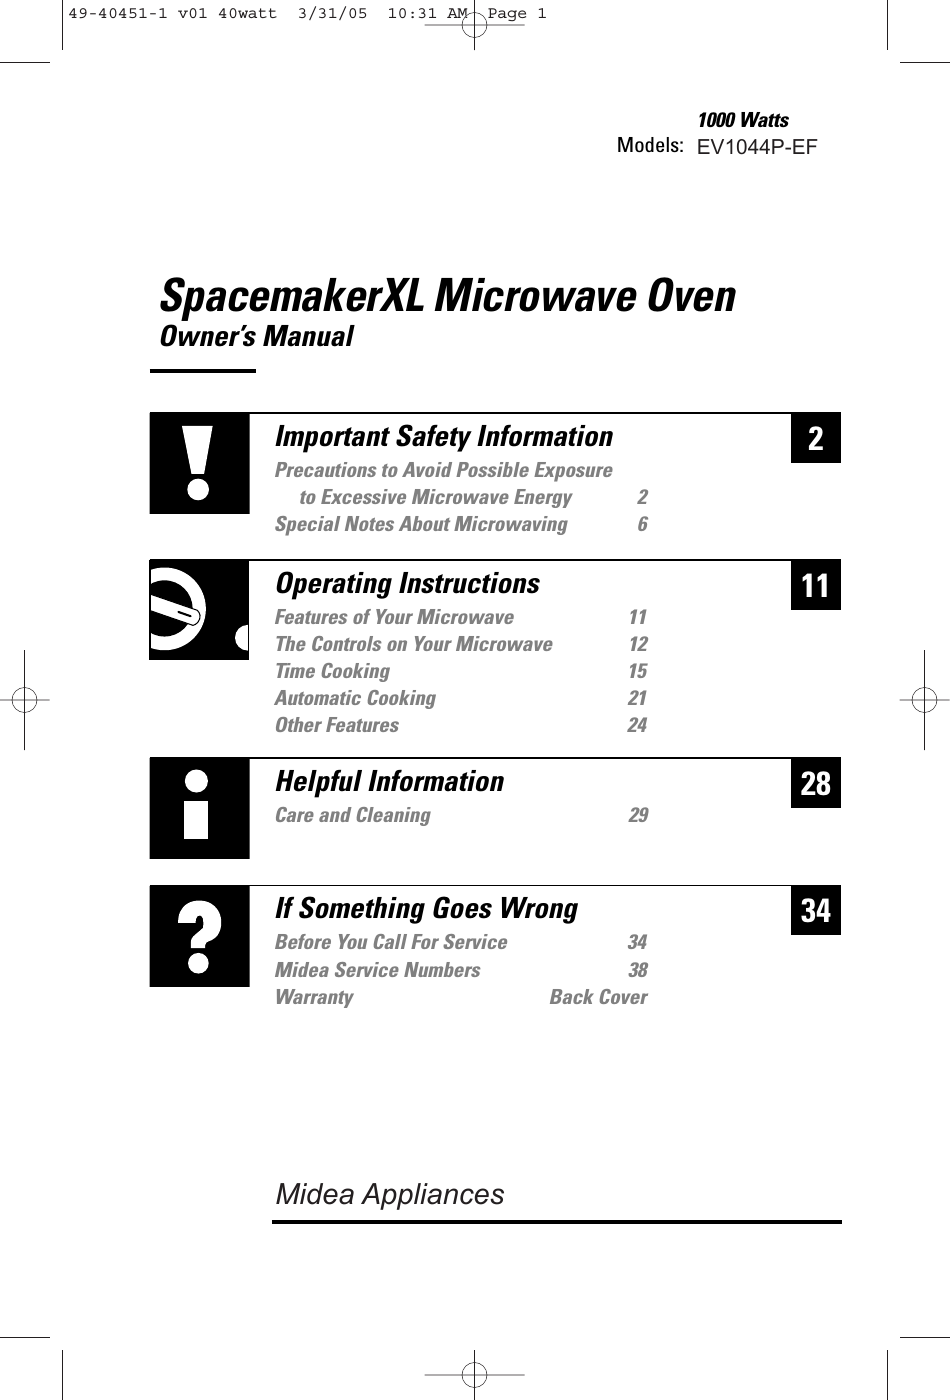 SpacemakerXL Microwave OvenOwner’s ManualModels: 1000 Watts228Helpful InformationCare and Cleaning 2934If Something Goes WrongBefore You Call For Service 3438Warranty Back Cover11Important Safety InformationPrecautions to Avoid Possible Exposure to Excessive Microwave Energy 2Special Notes About Microwaving 6Operating InstructionsFeatures of Your Microwave 11The Controls on Your Microwave 12Time Cooking 15Automatic Cooking 21Other Features 2449-40451-1 v01 40watt  3/31/05  10:31 AM  Page 1EV1044P-EFMidea Service NumbersMidea Appliances